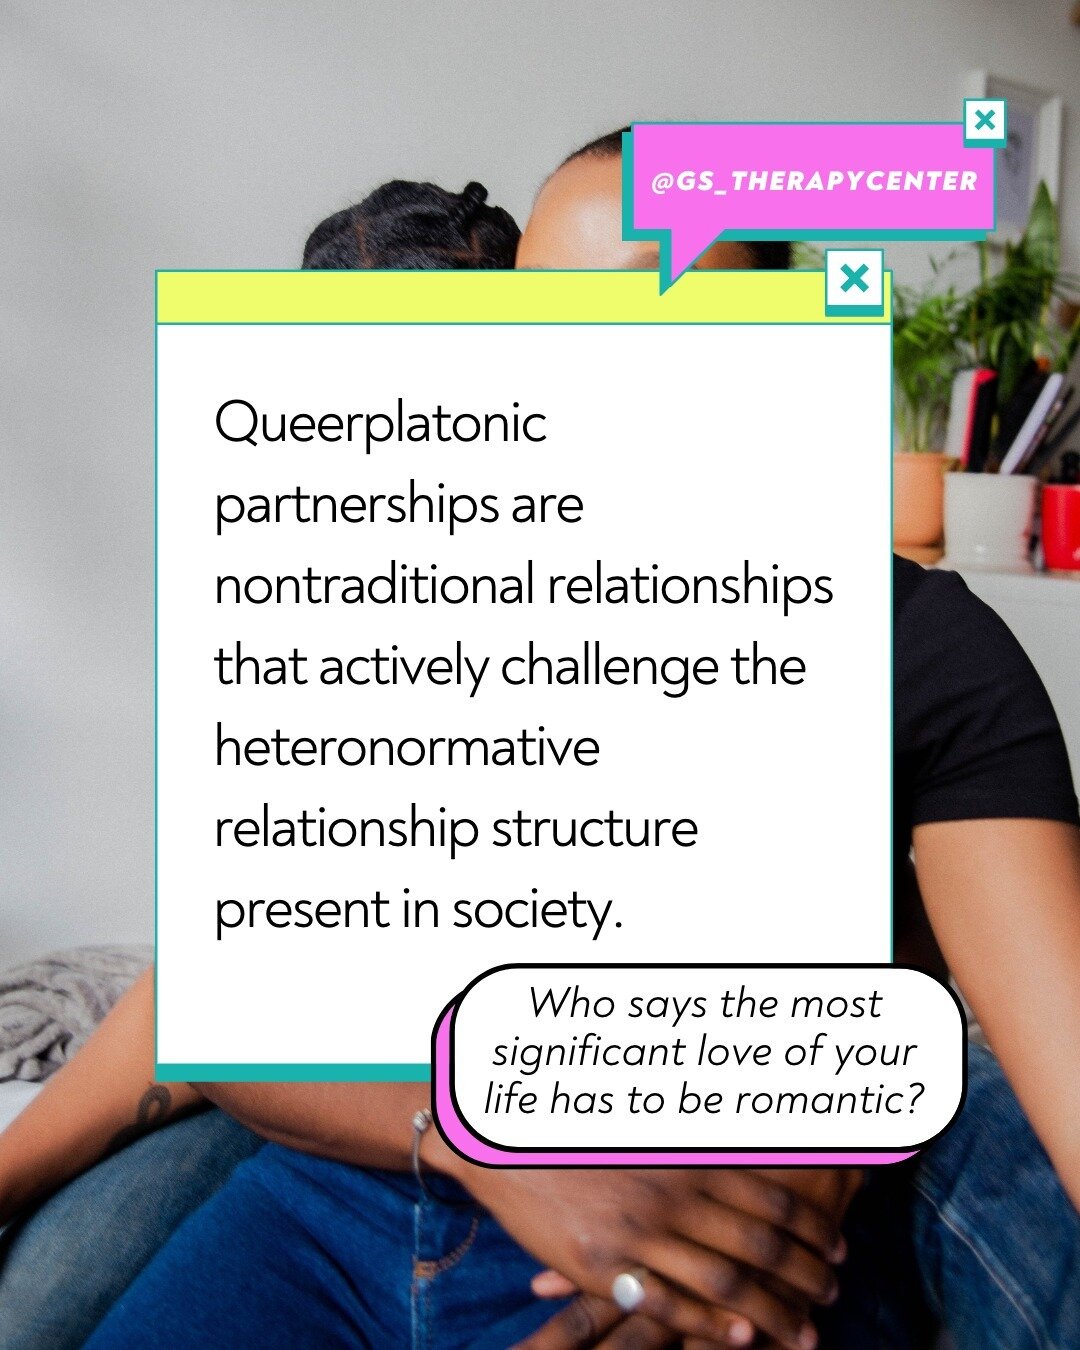 Modern western society prioritizes romantic love over all other types of love. QPPs disrupt that standard. Queering relationships means thinking critically about where your ideas of what relationships &ldquo;should&rdquo; look like according to socie